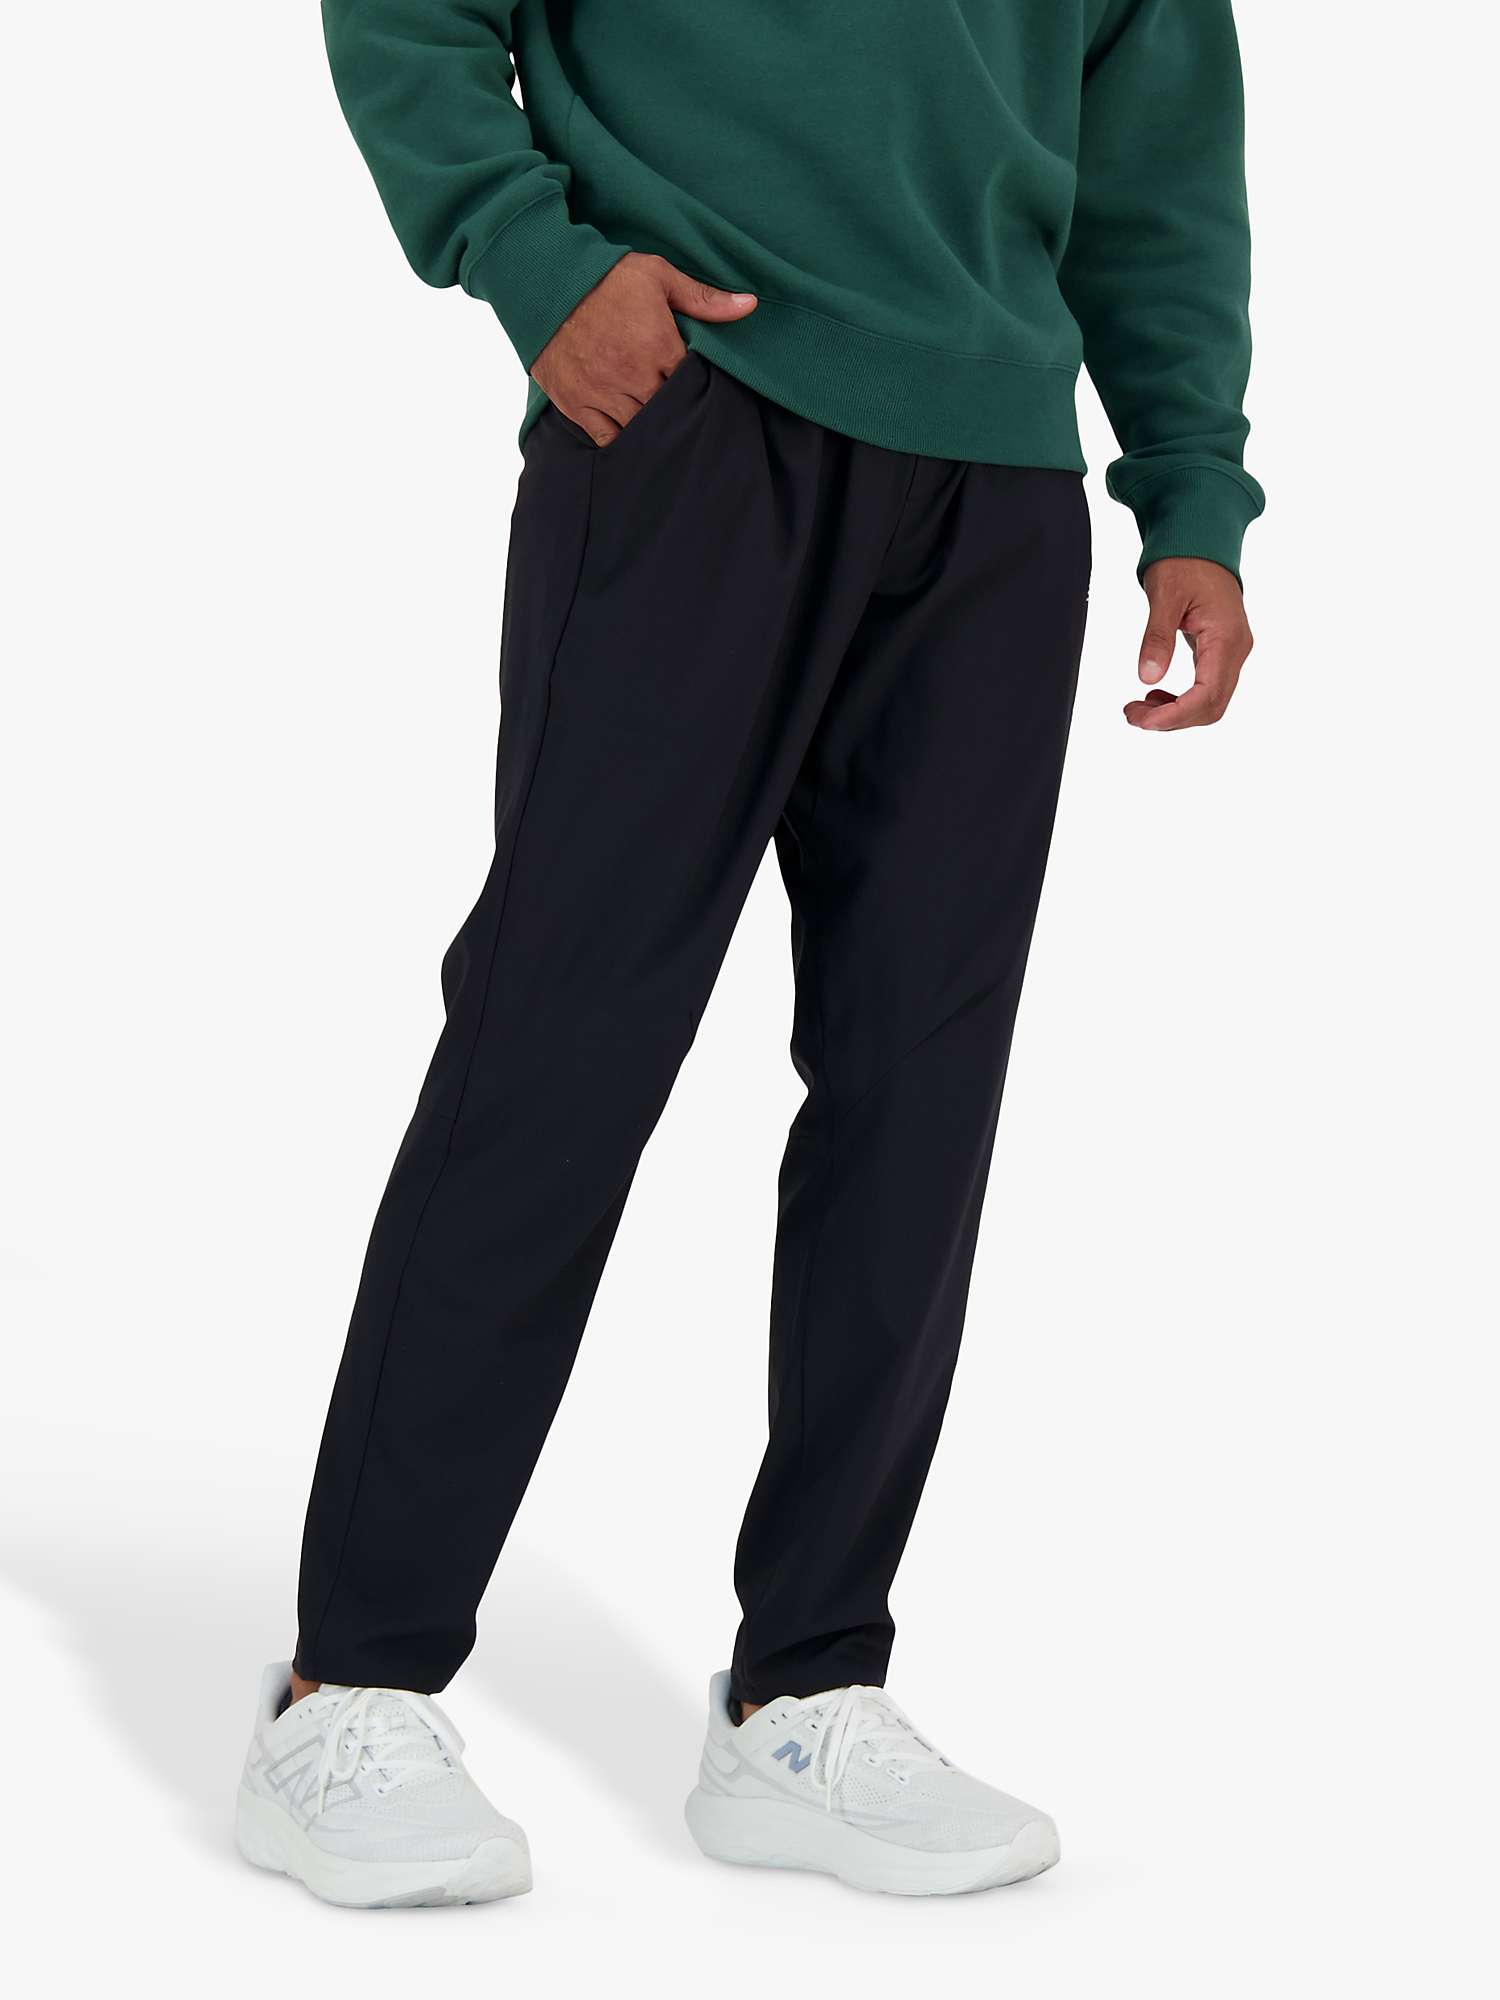 Buy New Balance Tapered Joggers, Black Online at johnlewis.com